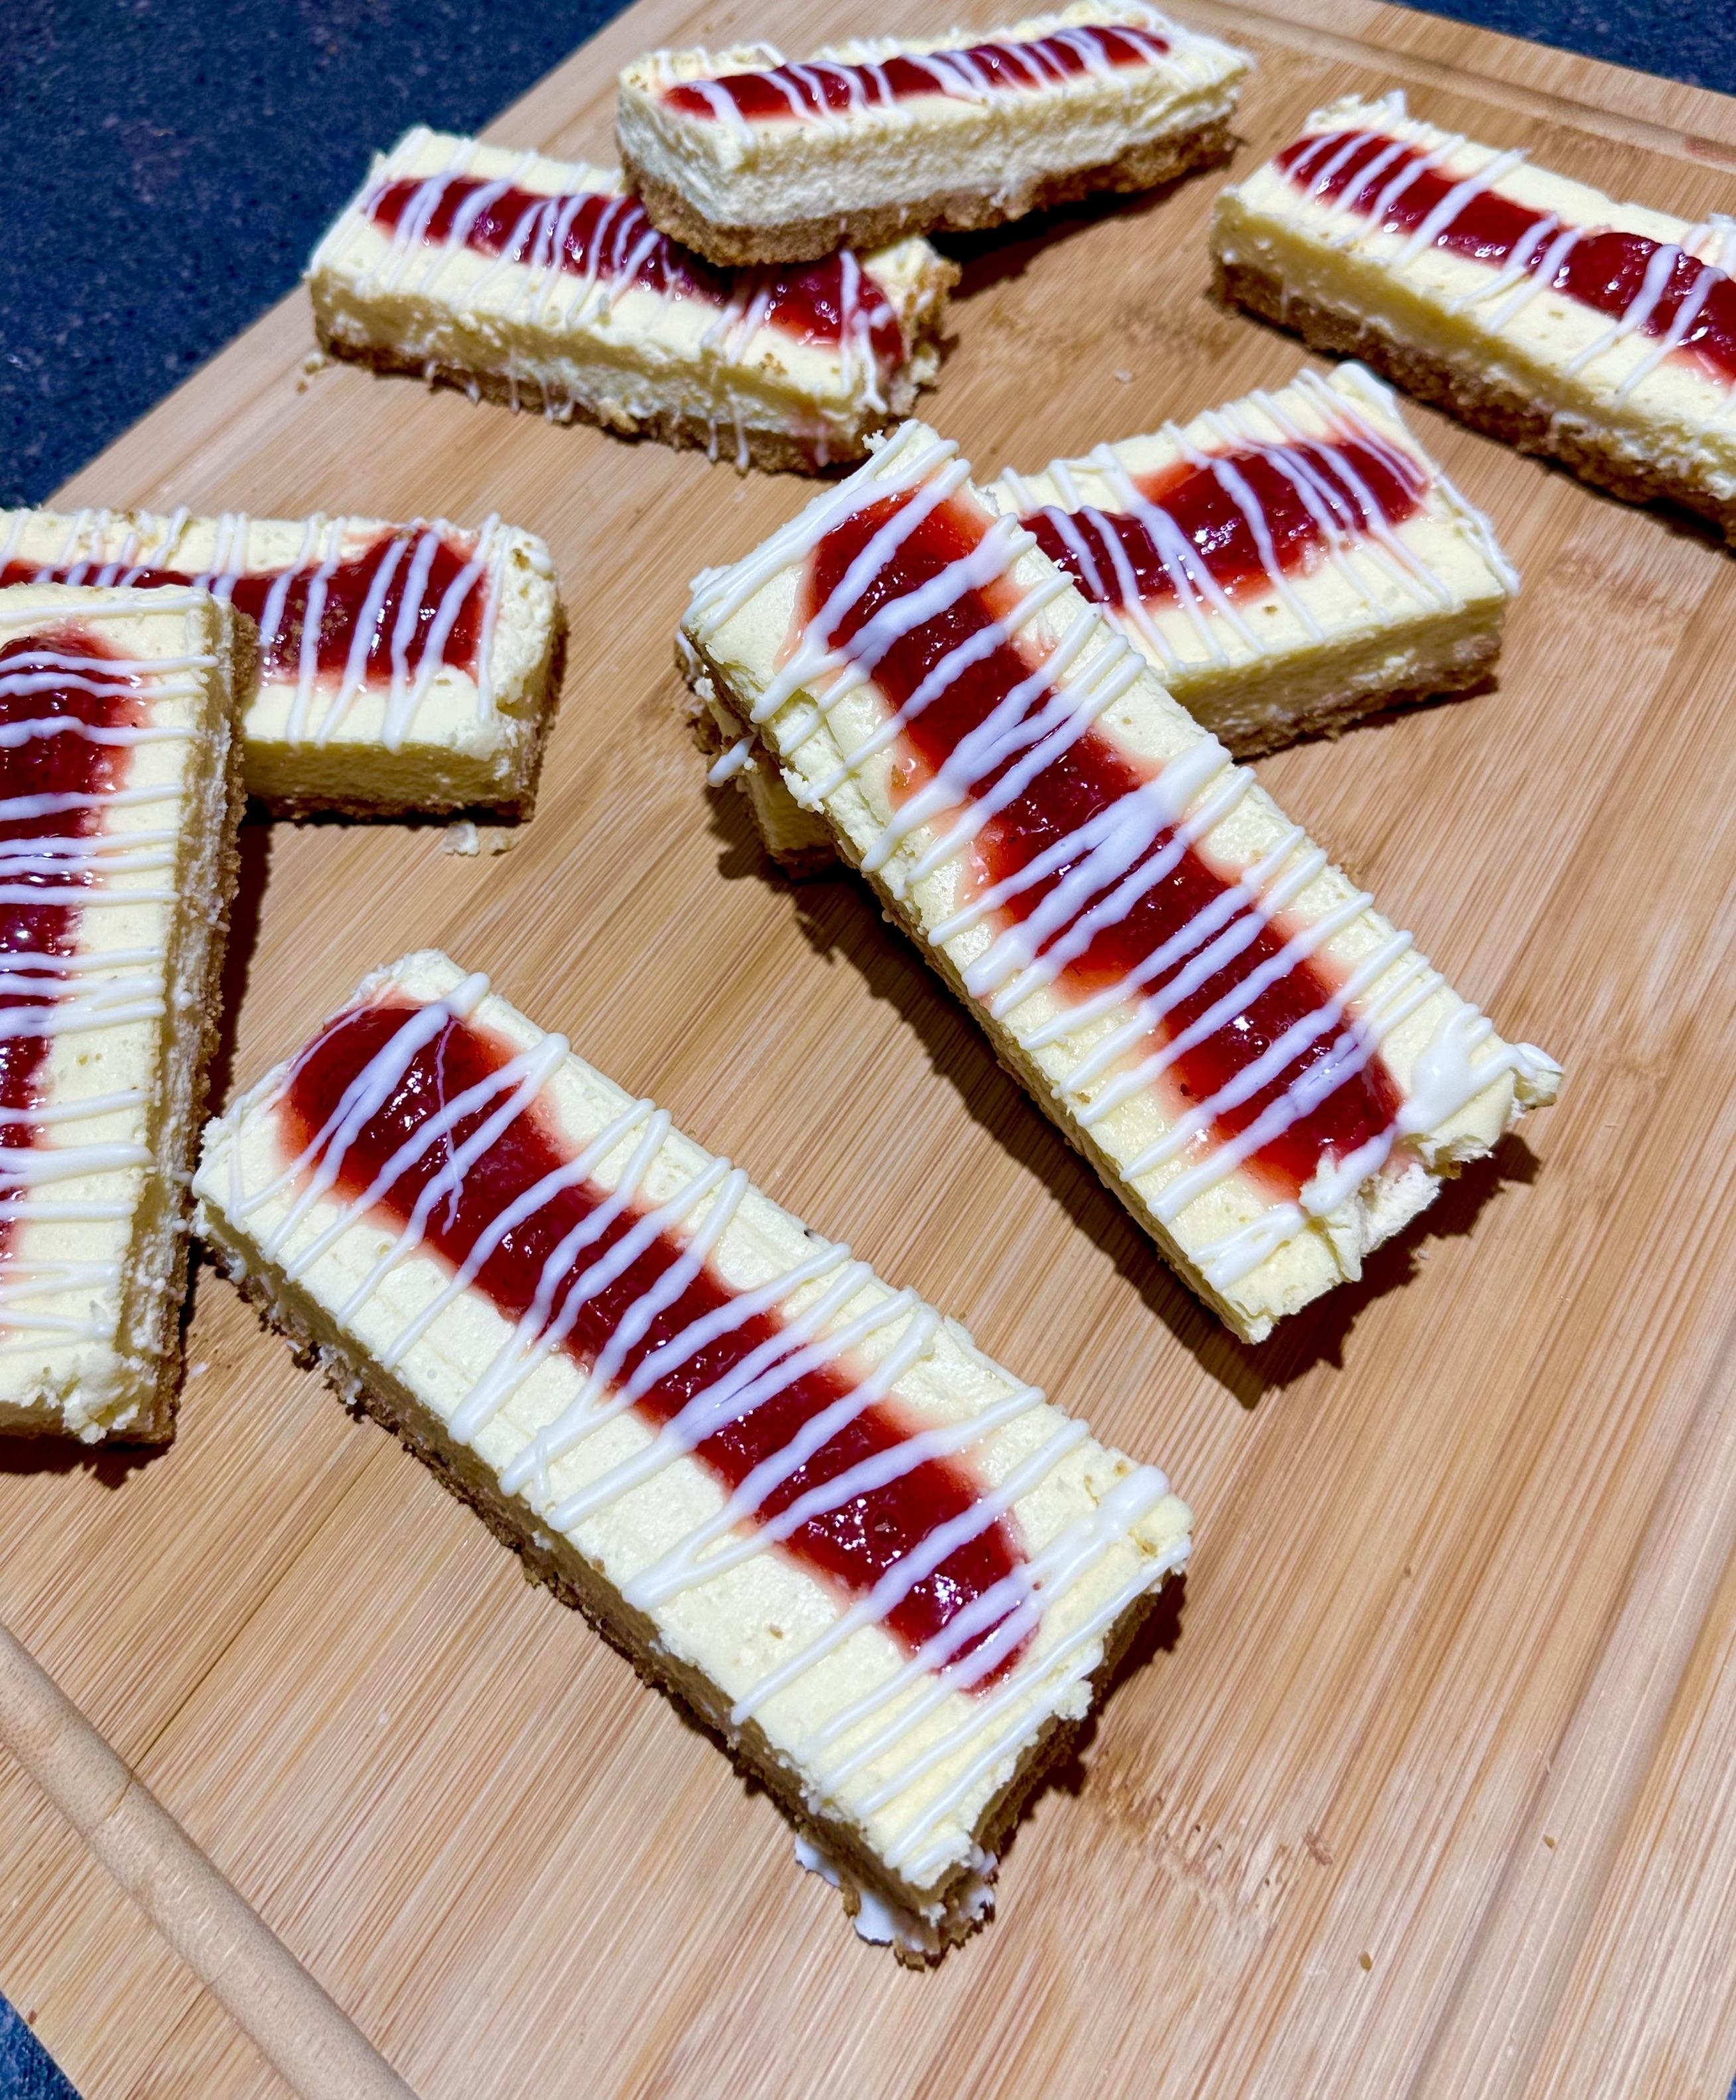 Rectangular dessert bars on a wooden board topped with white and red icing drizzles